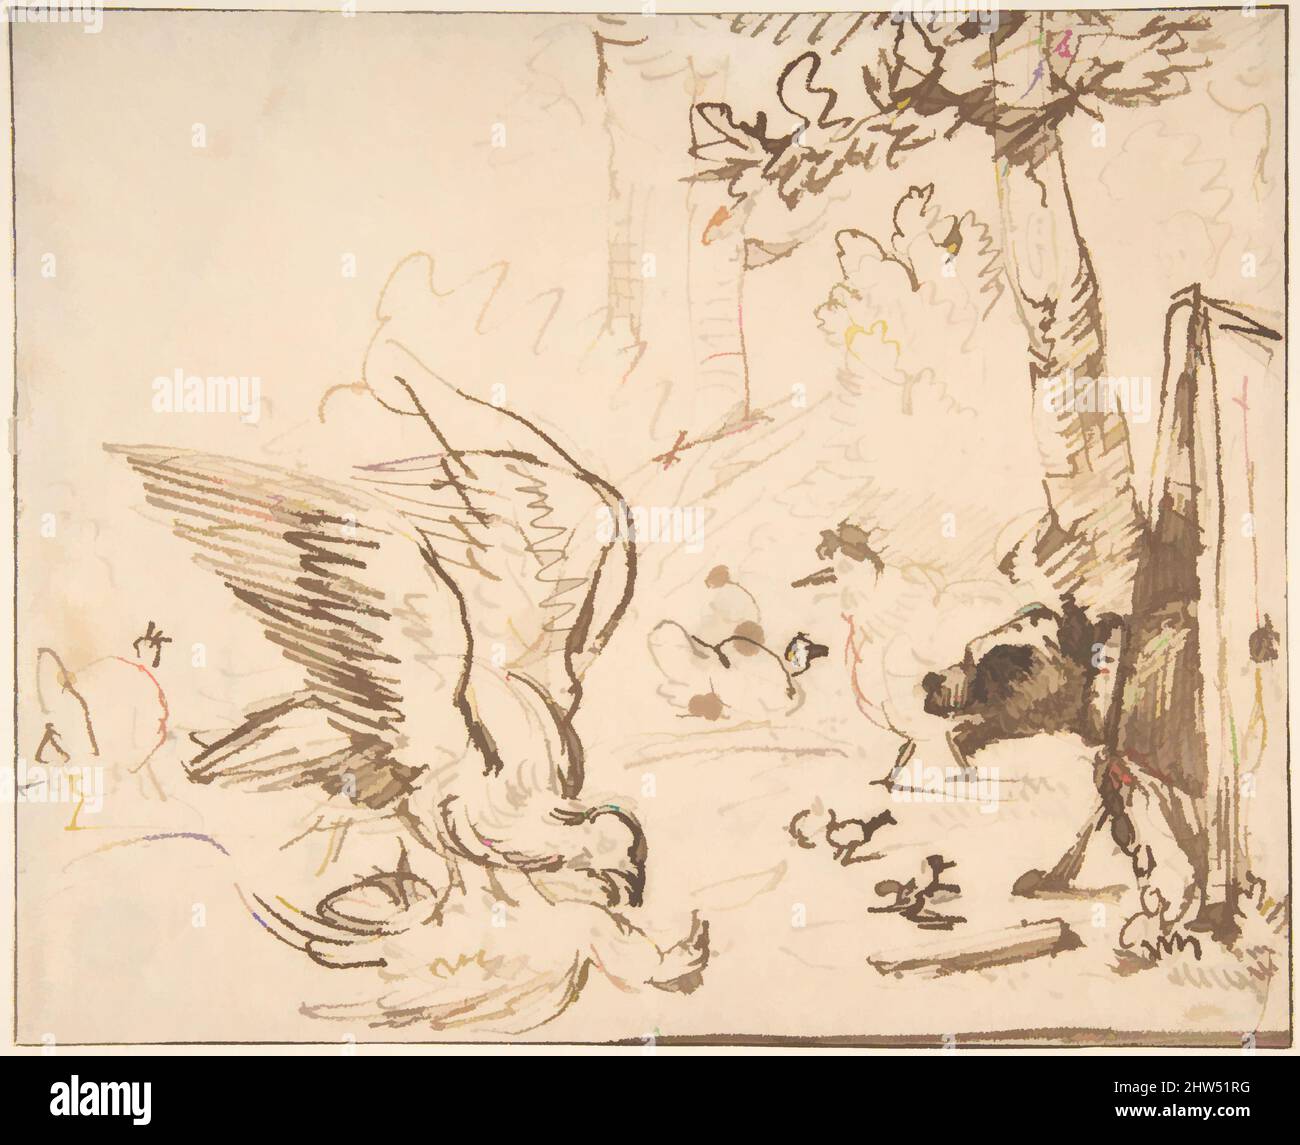 Art inspired by Barnyard Scene: two birds fighting (recto), mid-17th century, Pen and brown ink., 6 1/4 x 7 5/8 in. (15.8 x 19.4 cm), Drawings, Anthonie van Borssom (Dutch, Amsterdam 1630/31–1677 Amsterdam, Classic works modernized by Artotop with a splash of modernity. Shapes, color and value, eye-catching visual impact on art. Emotions through freedom of artworks in a contemporary way. A timeless message pursuing a wildly creative new direction. Artists turning to the digital medium and creating the Artotop NFT Stock Photo